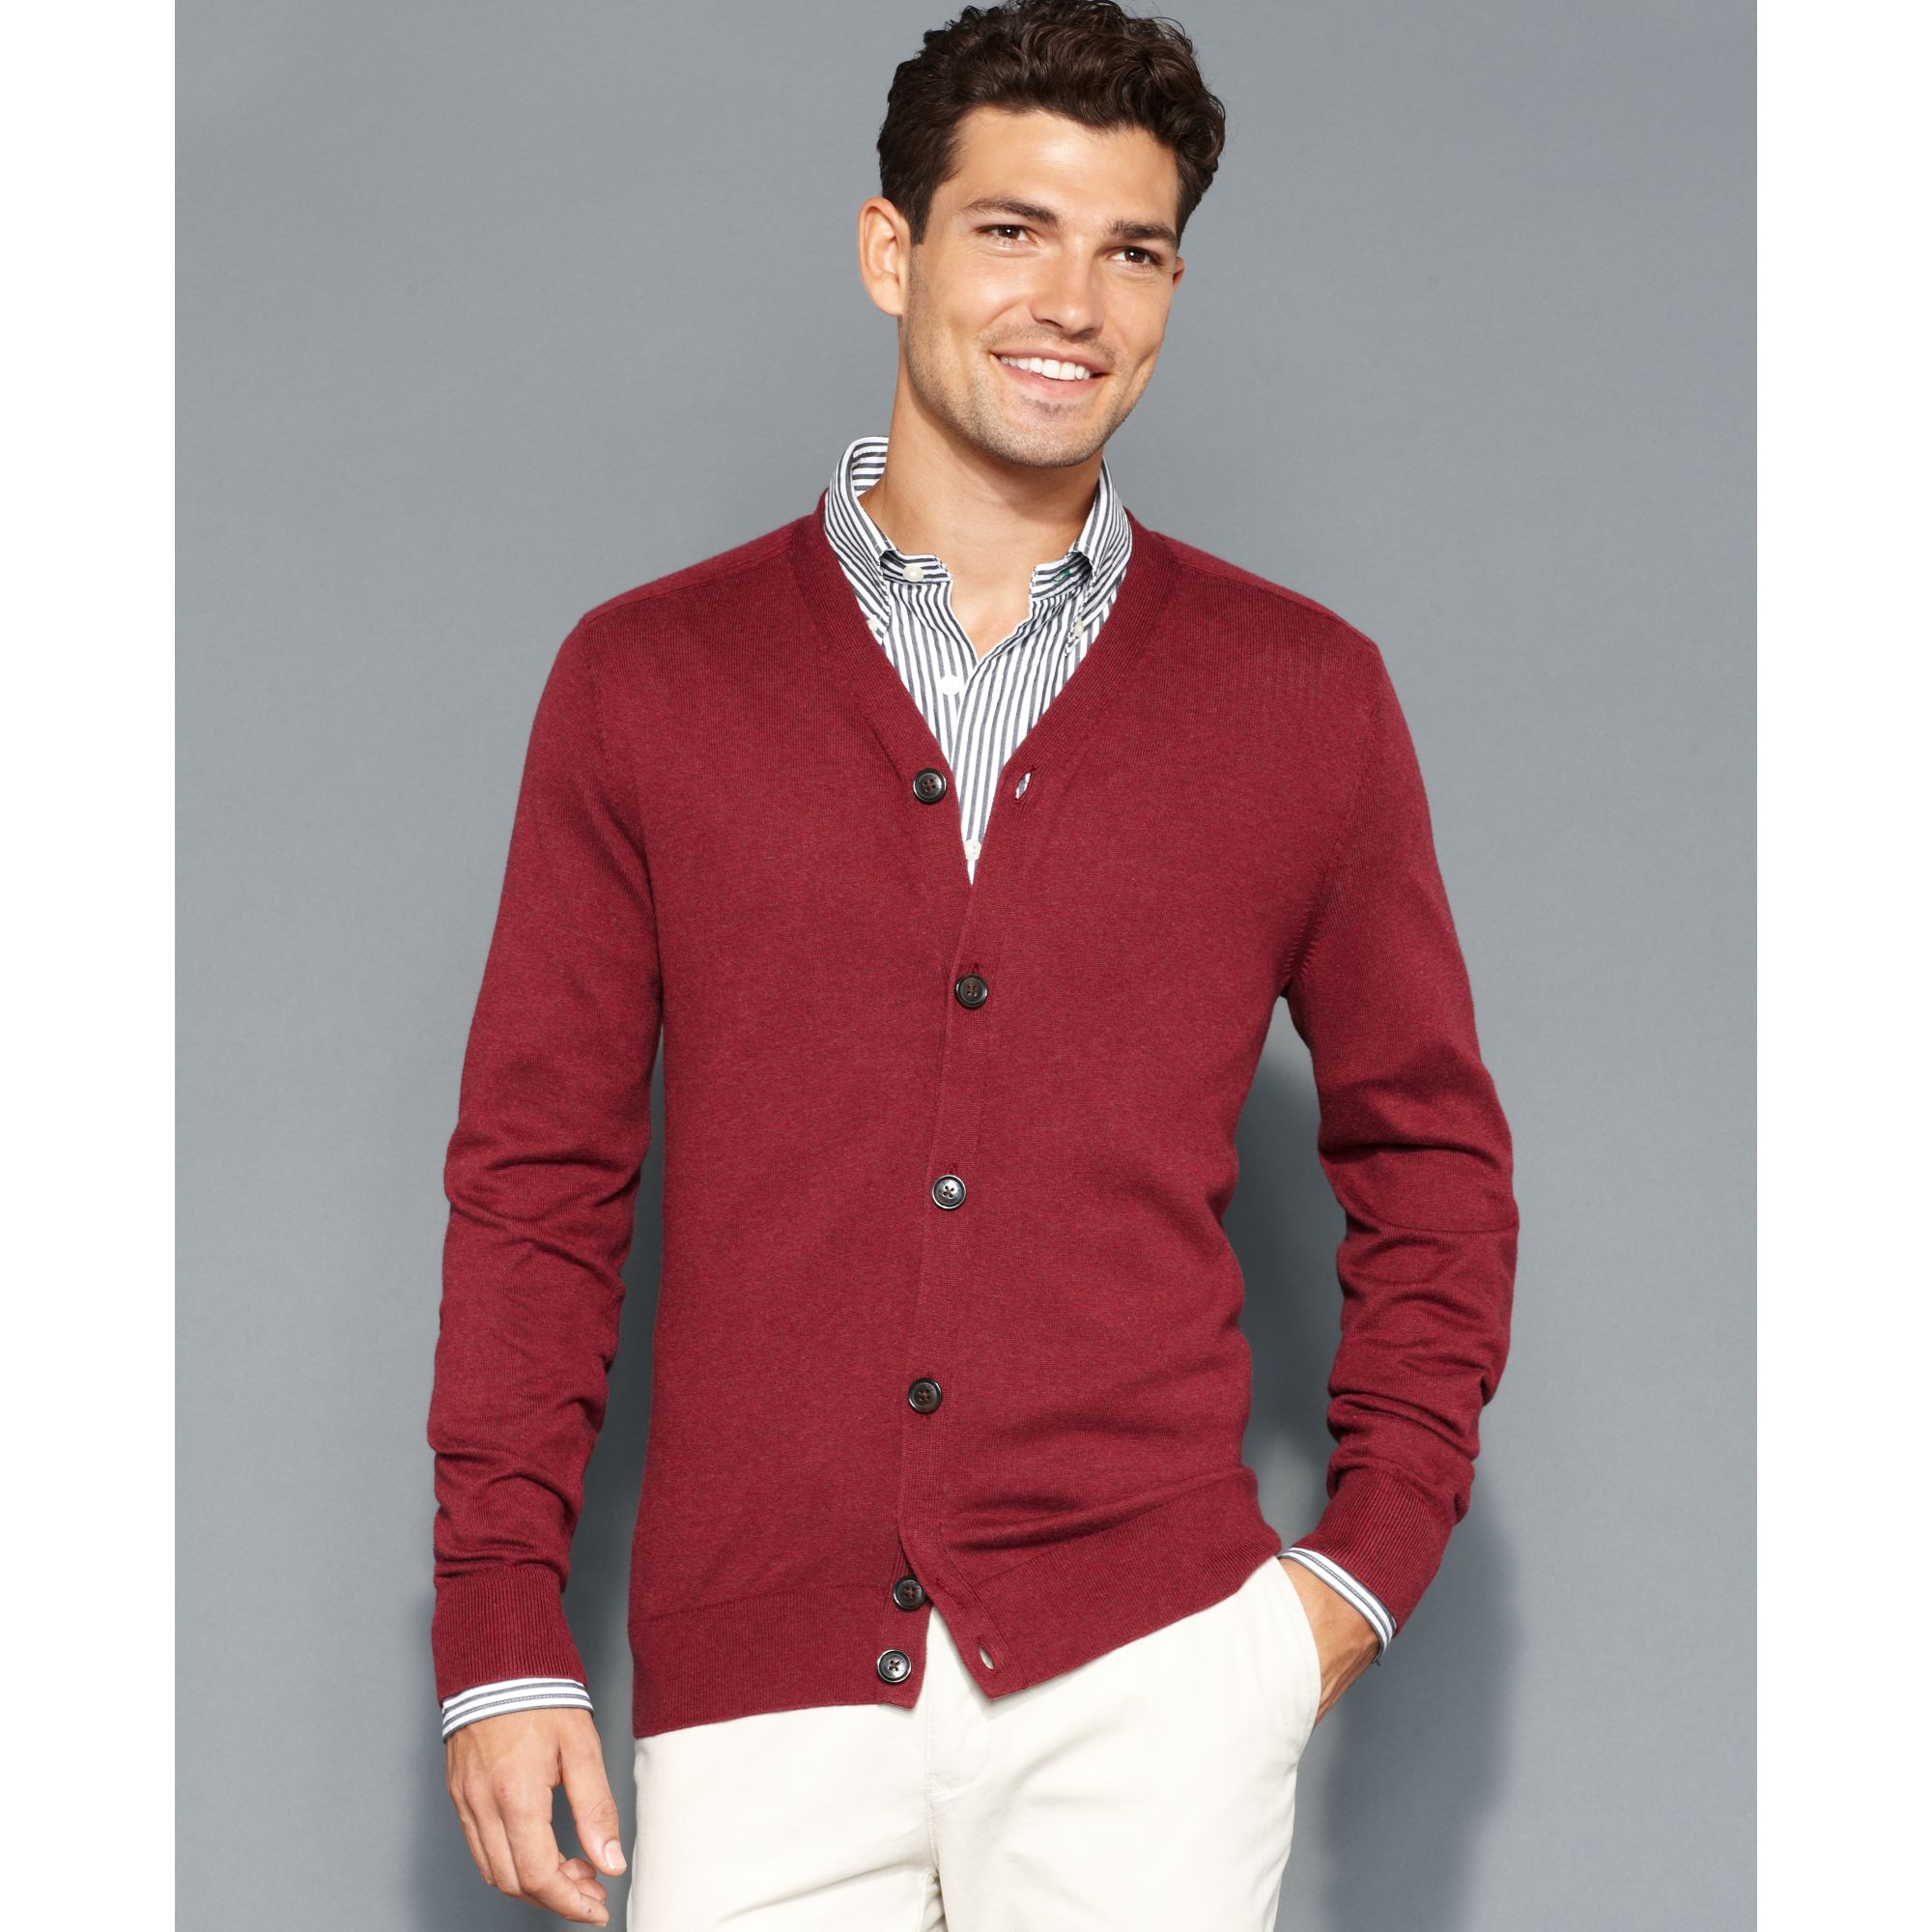 Lyst - Tommy hilfiger American Cardigan in Red for Men